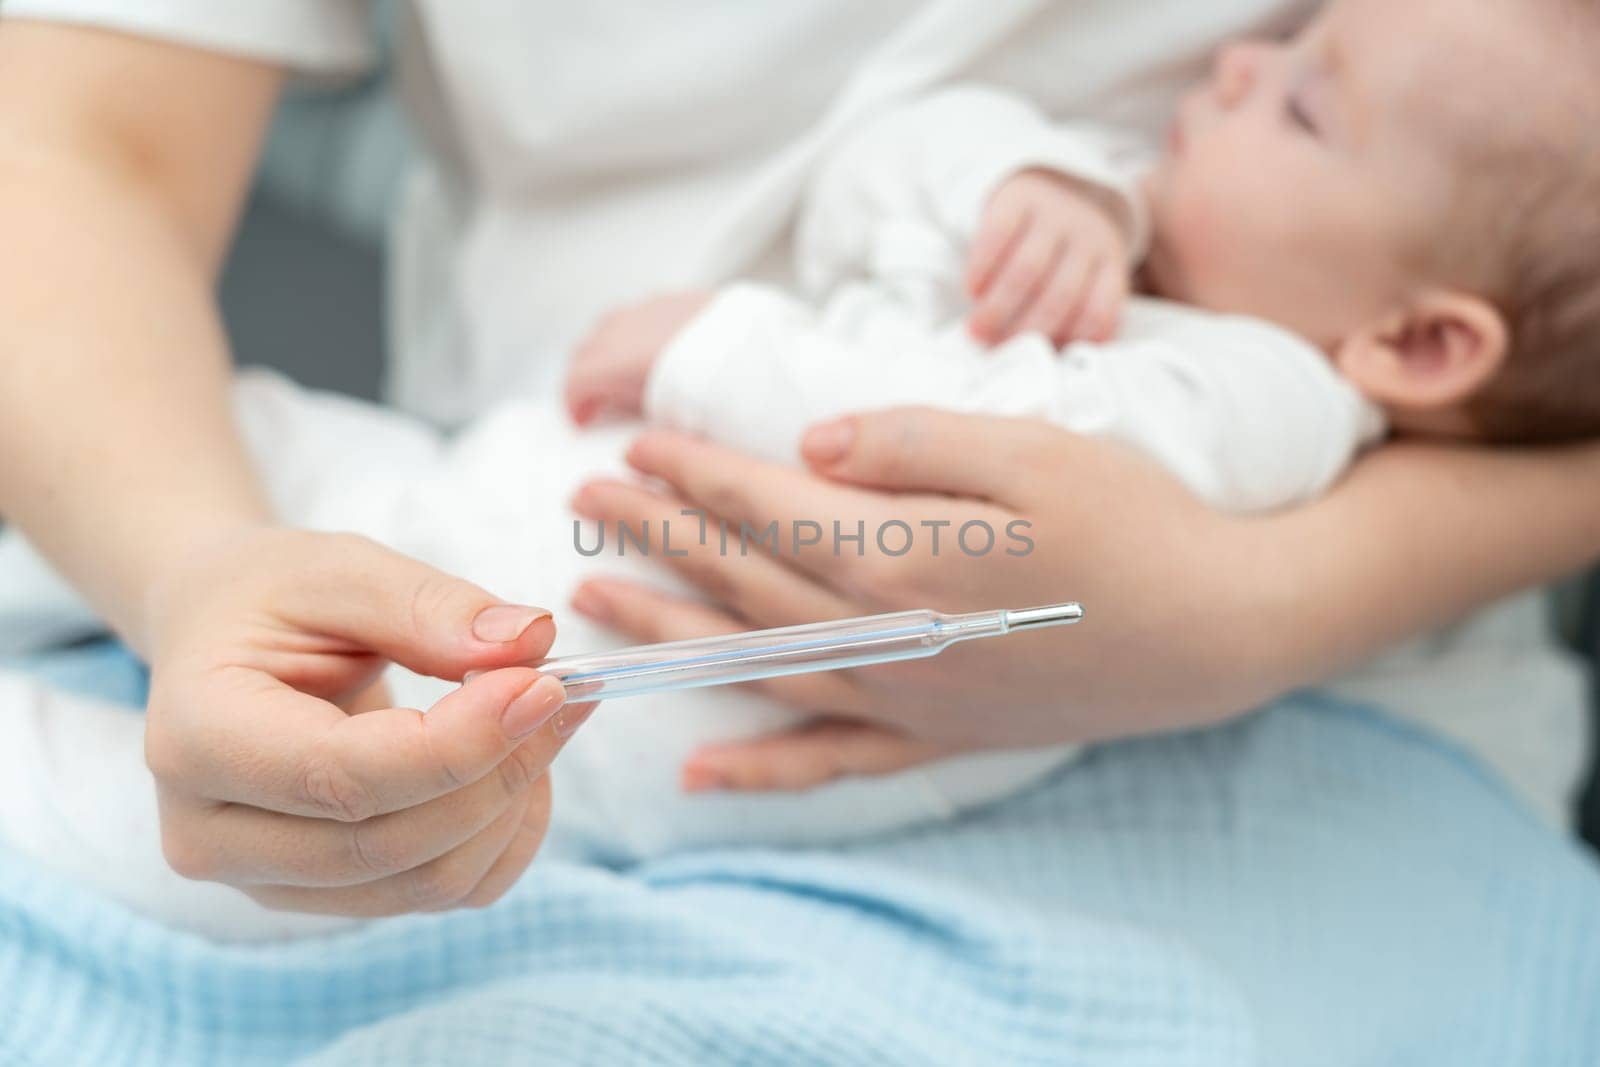 Caring mother precisely measures her newborn's temperature with a mercury thermometer, highlighting